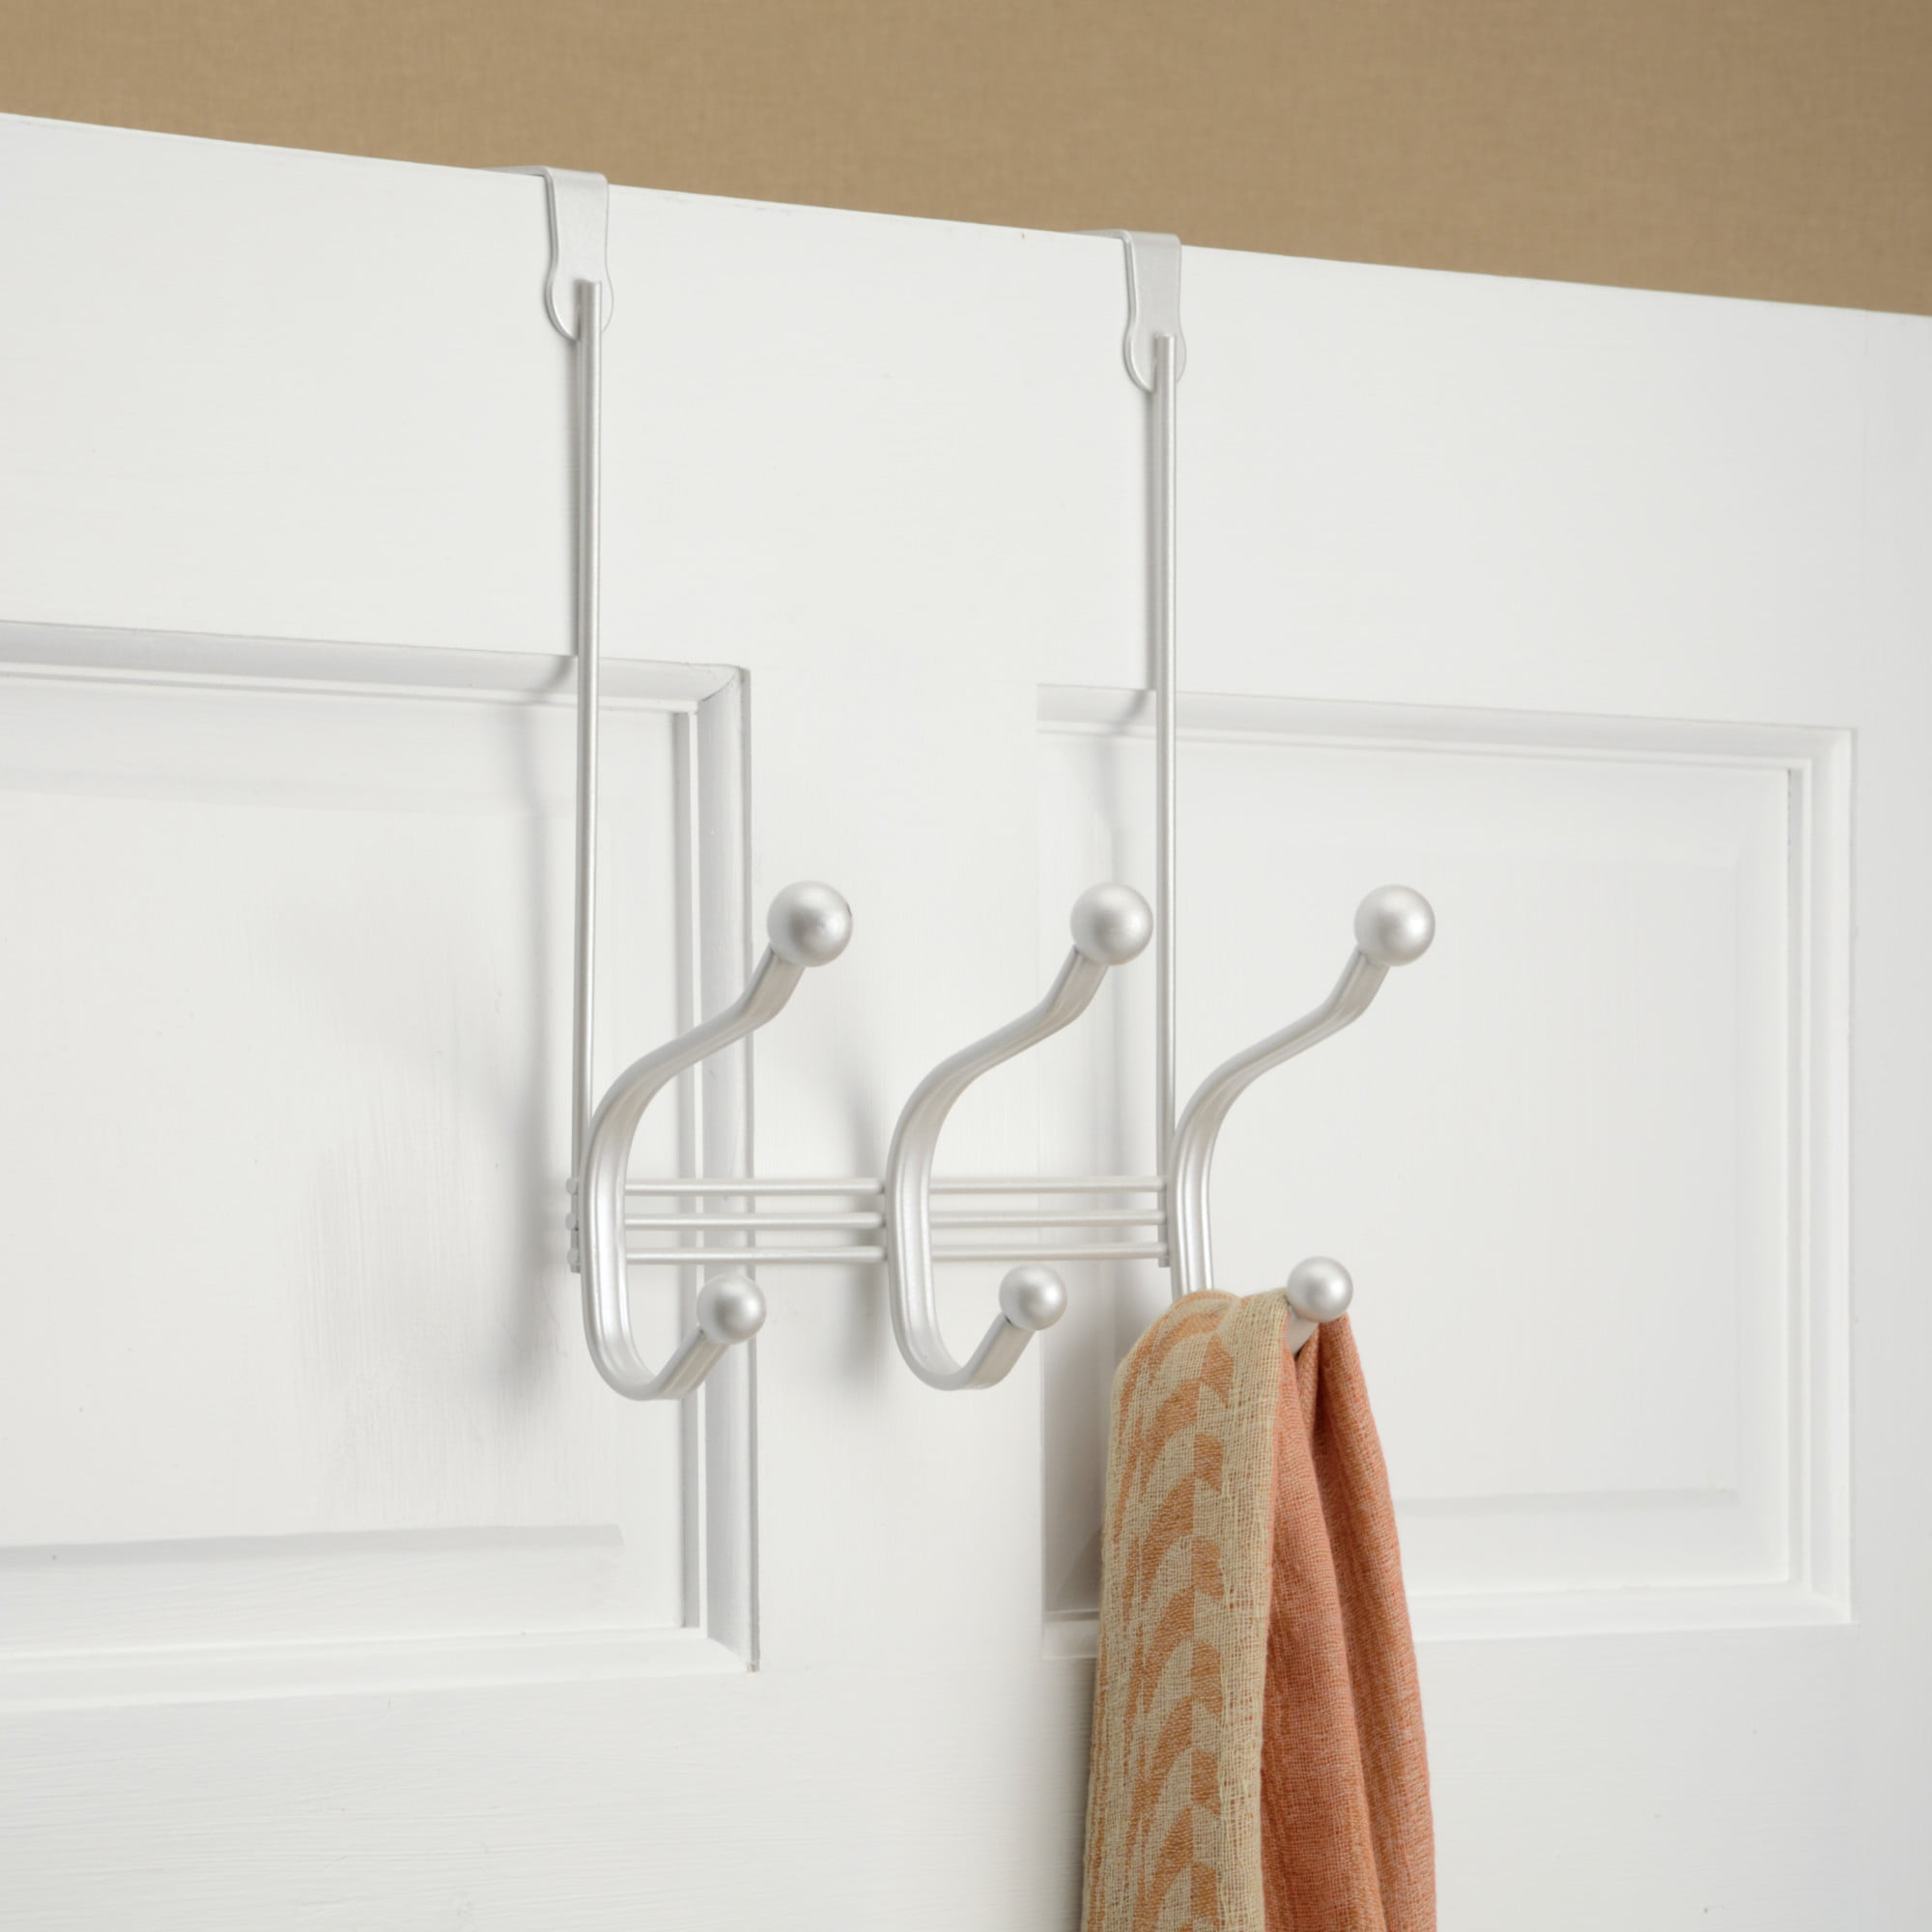 2PC TWIN TWO OVER THE DOOR HOOKS CLOTHES HANGERS IRONING HANGER COAT RACK WHITE 